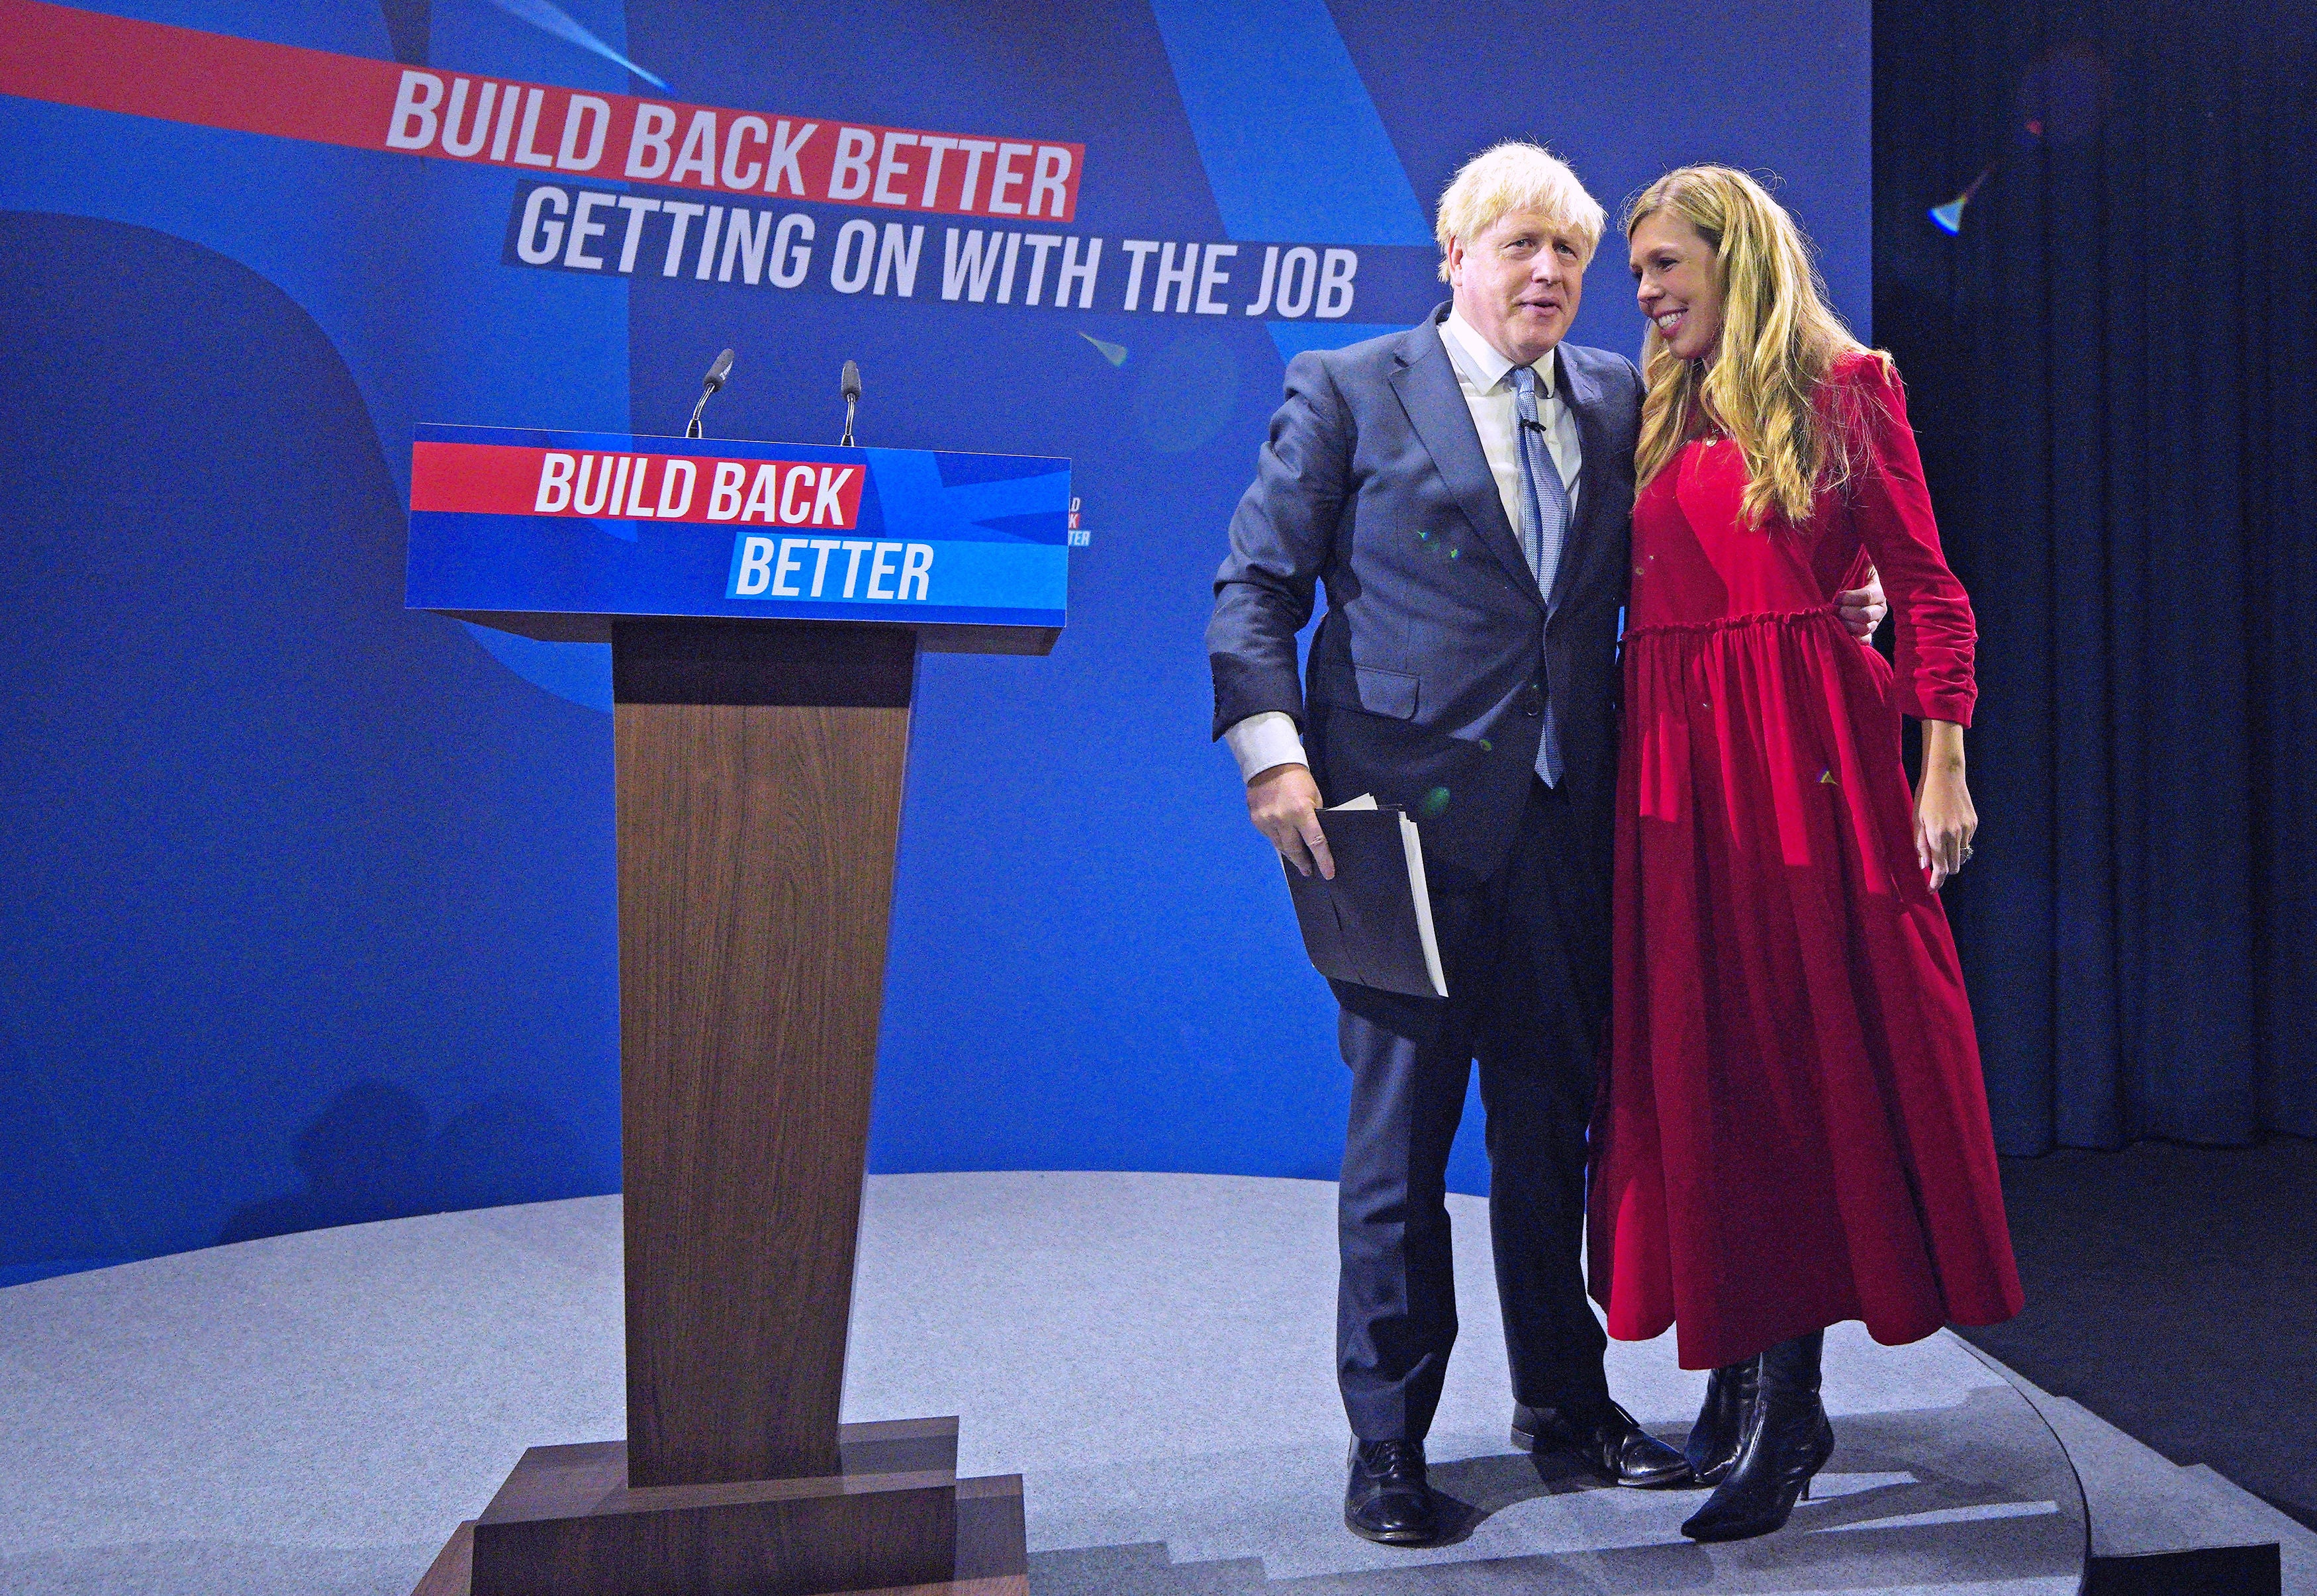 Prime minister Boris Johnson is joined by his wife Carrie on stage after delivering his keynote speech at the 2021 Conservative Party conference in Manchester